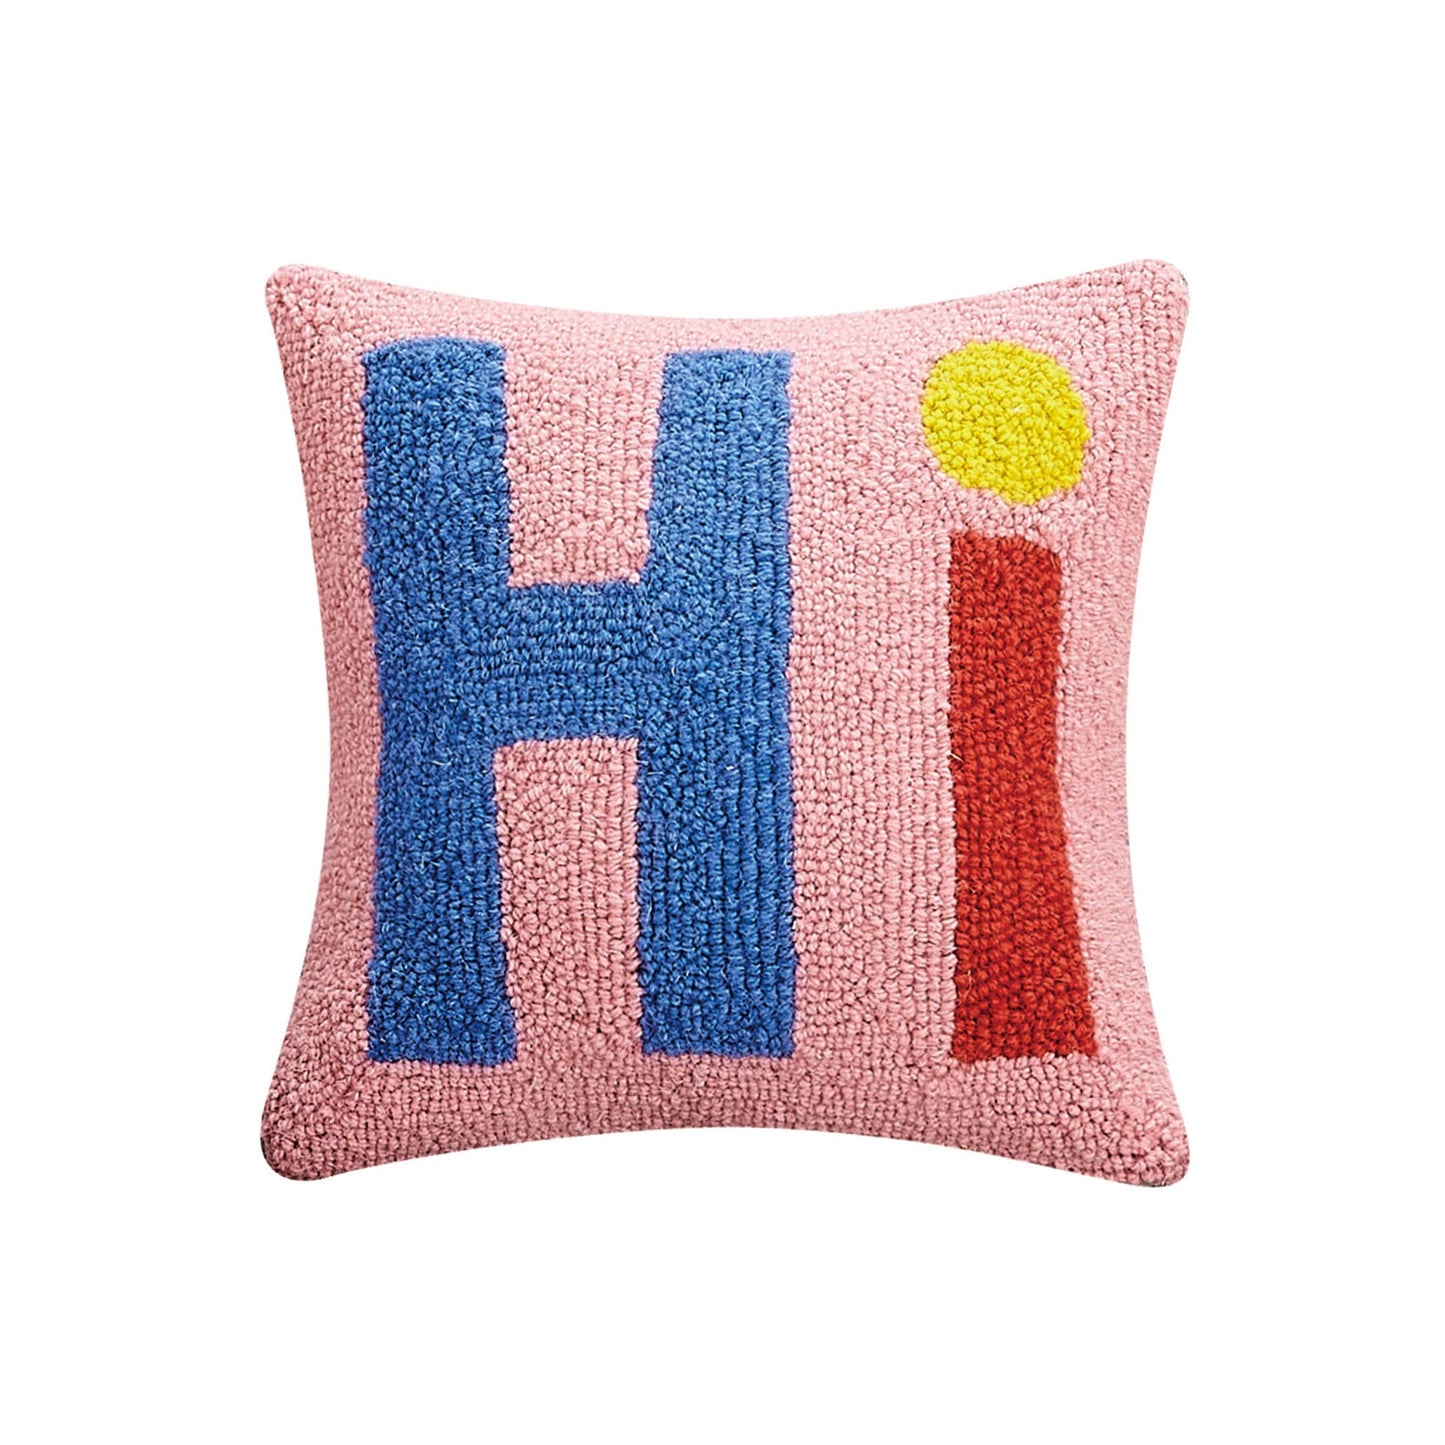 Hi Hook Pillow by Ampersand